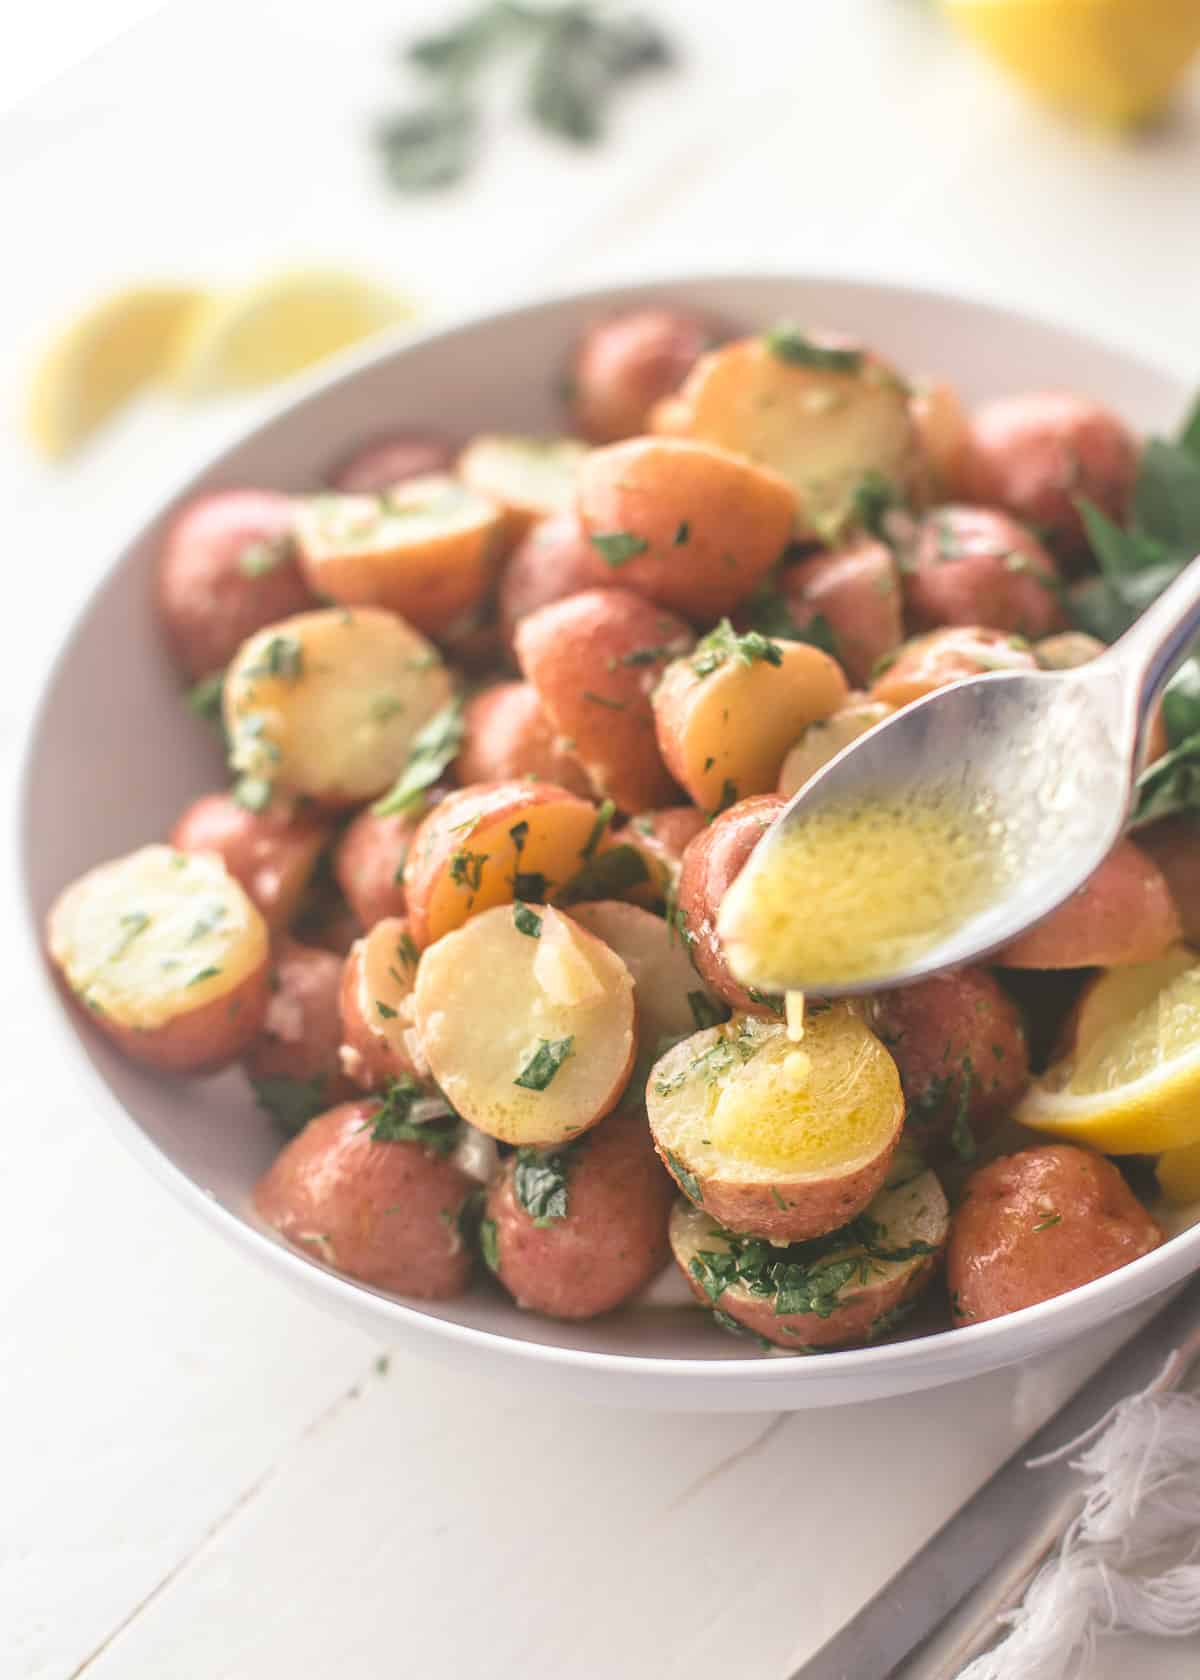 drizzling dressing over red potatoes in a white bowl